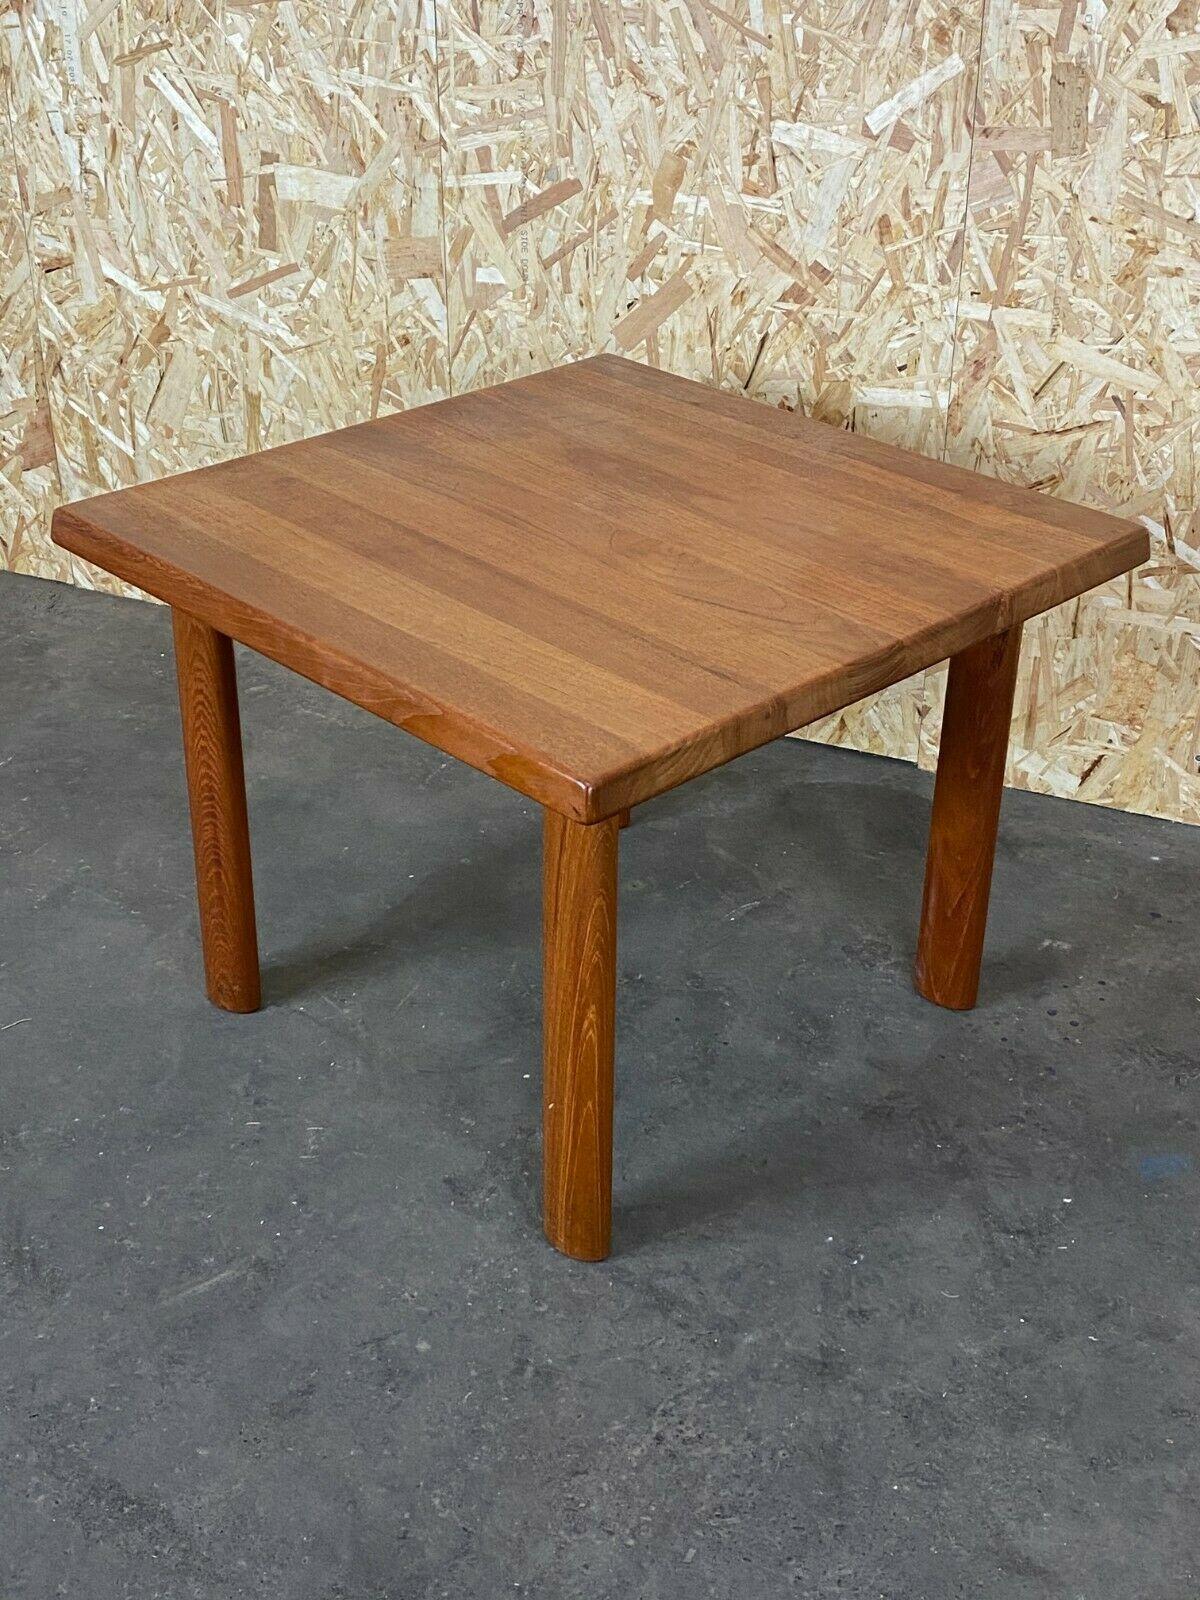 70s teak coffee table coffee table Danish Design Denmark Mid Century

Object: coffee table

Manufacturer:

Condition: good - vintage

Age: around 1960-1970

Dimensions:

70cm x 70cm x 52cm

Other notes:

The pictures serve as part of